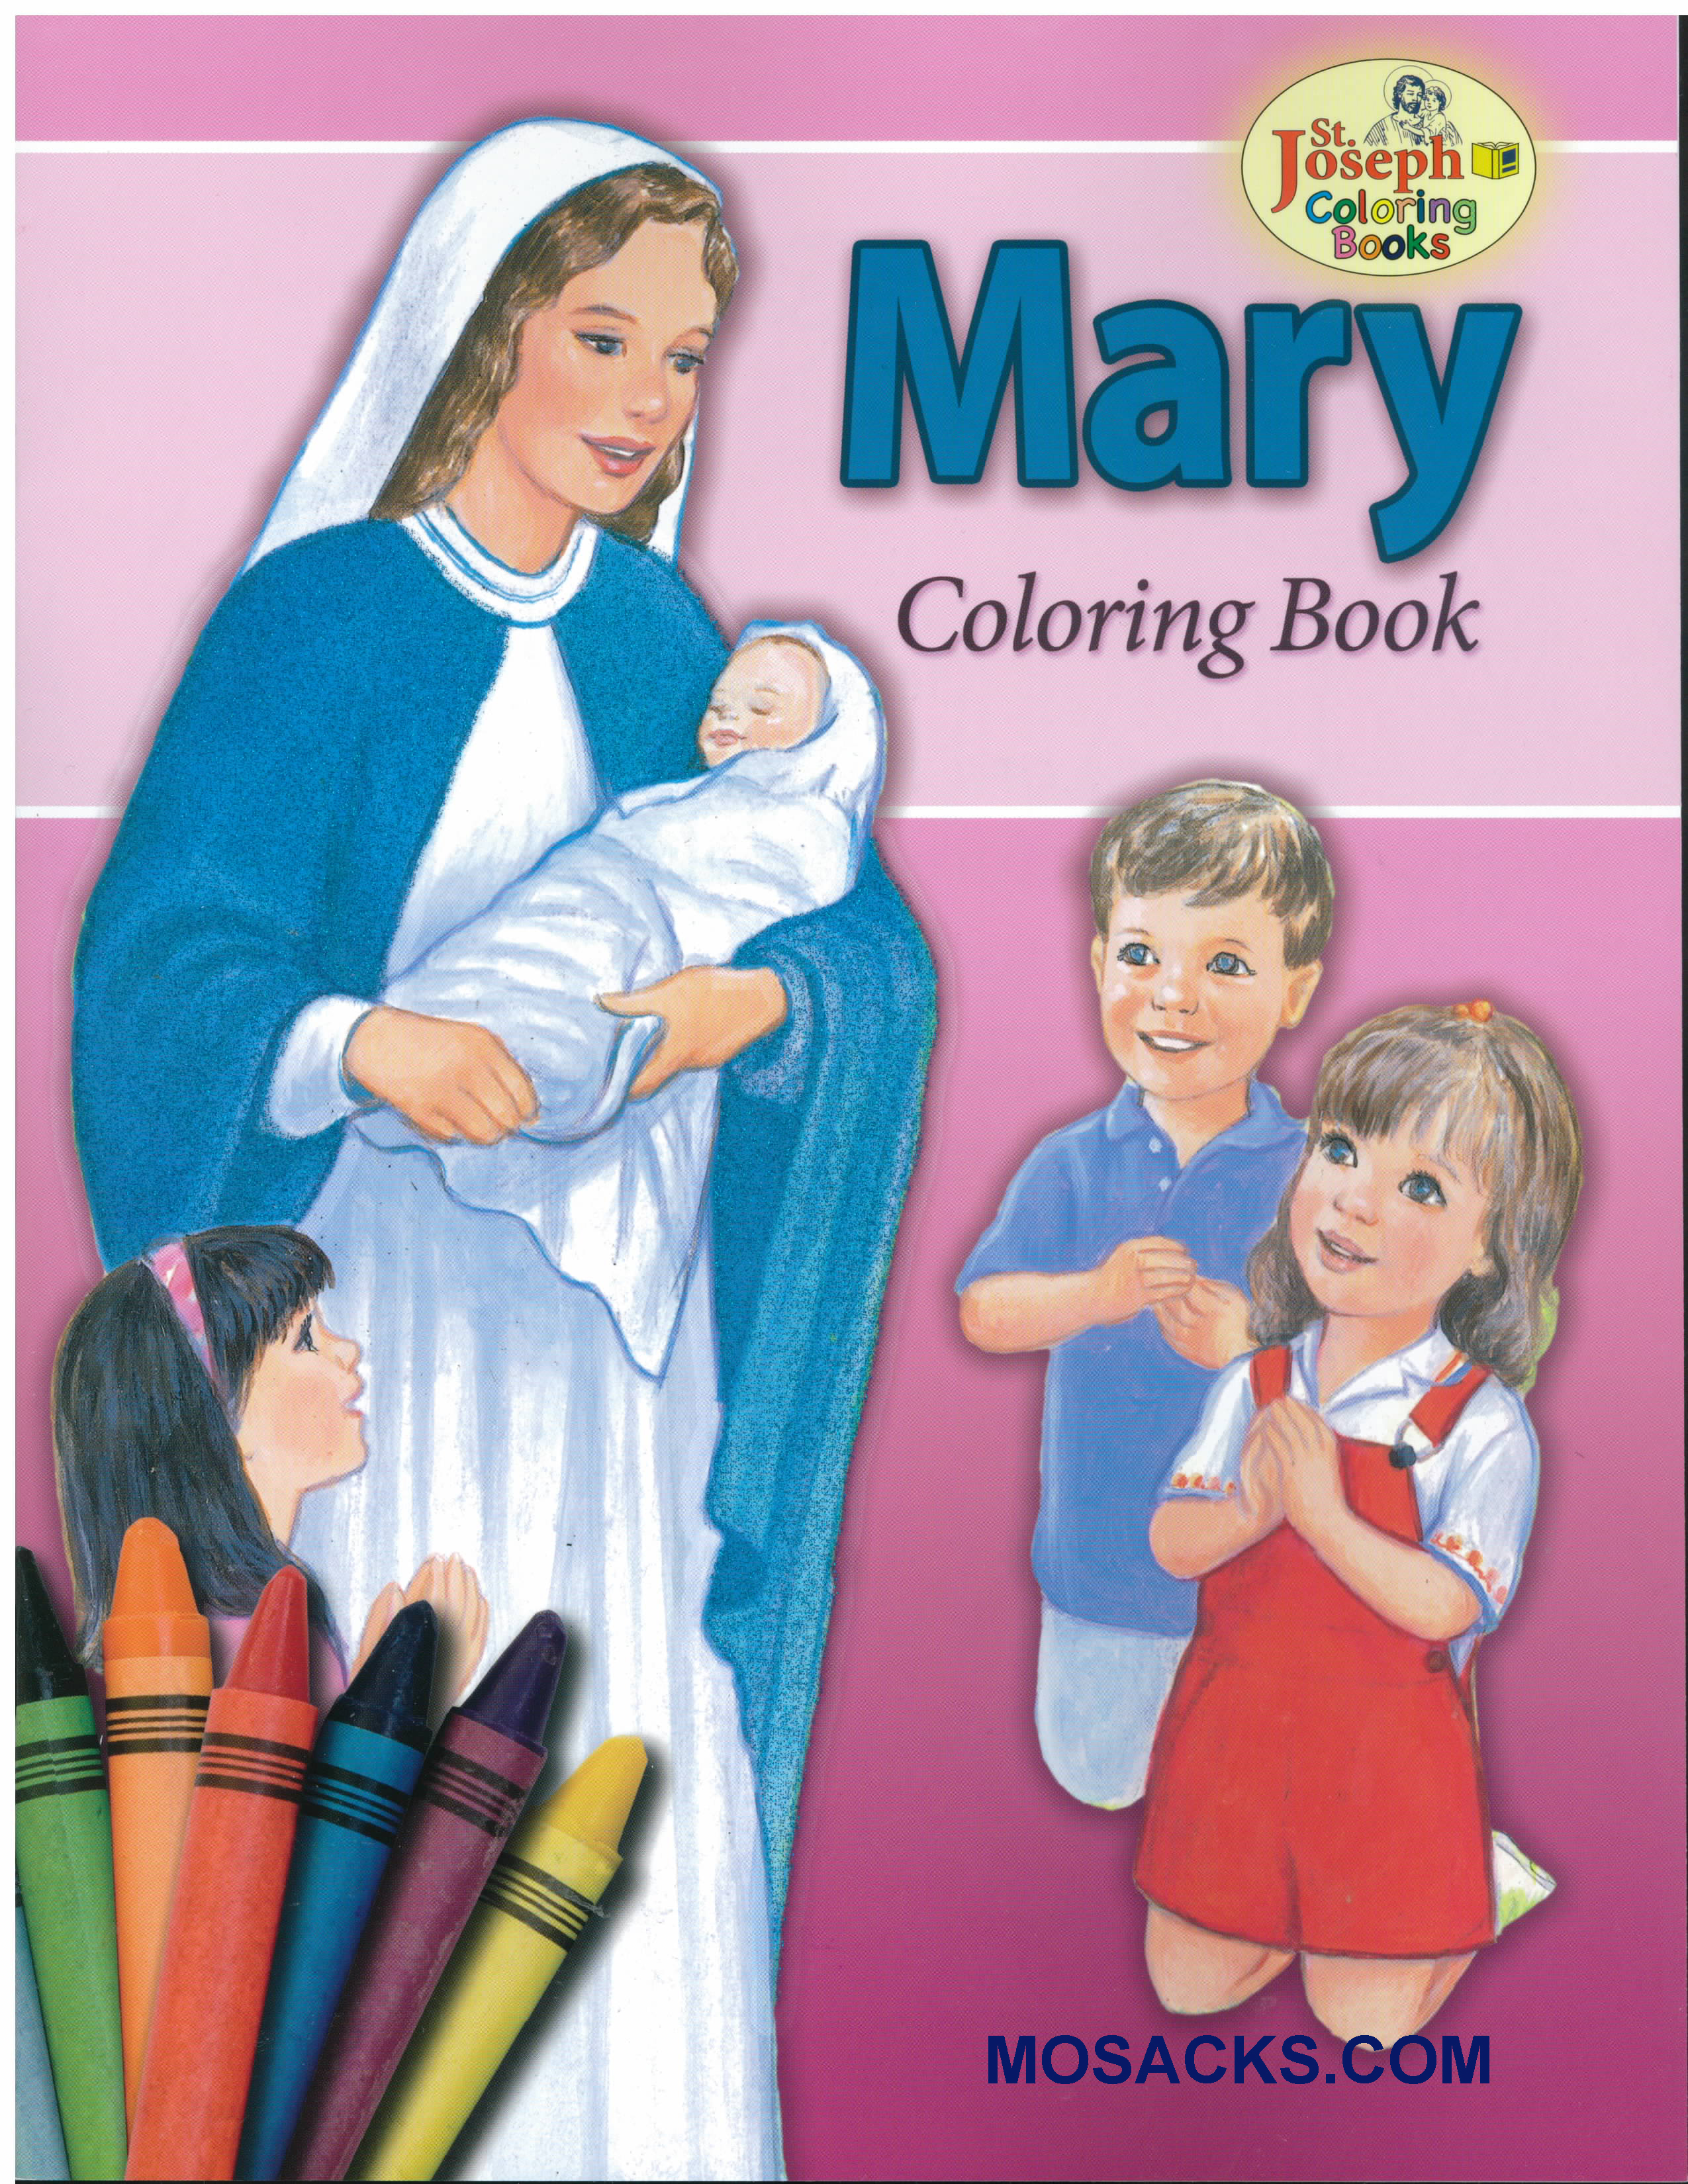 Coloring Book About Mary-978089942685-3